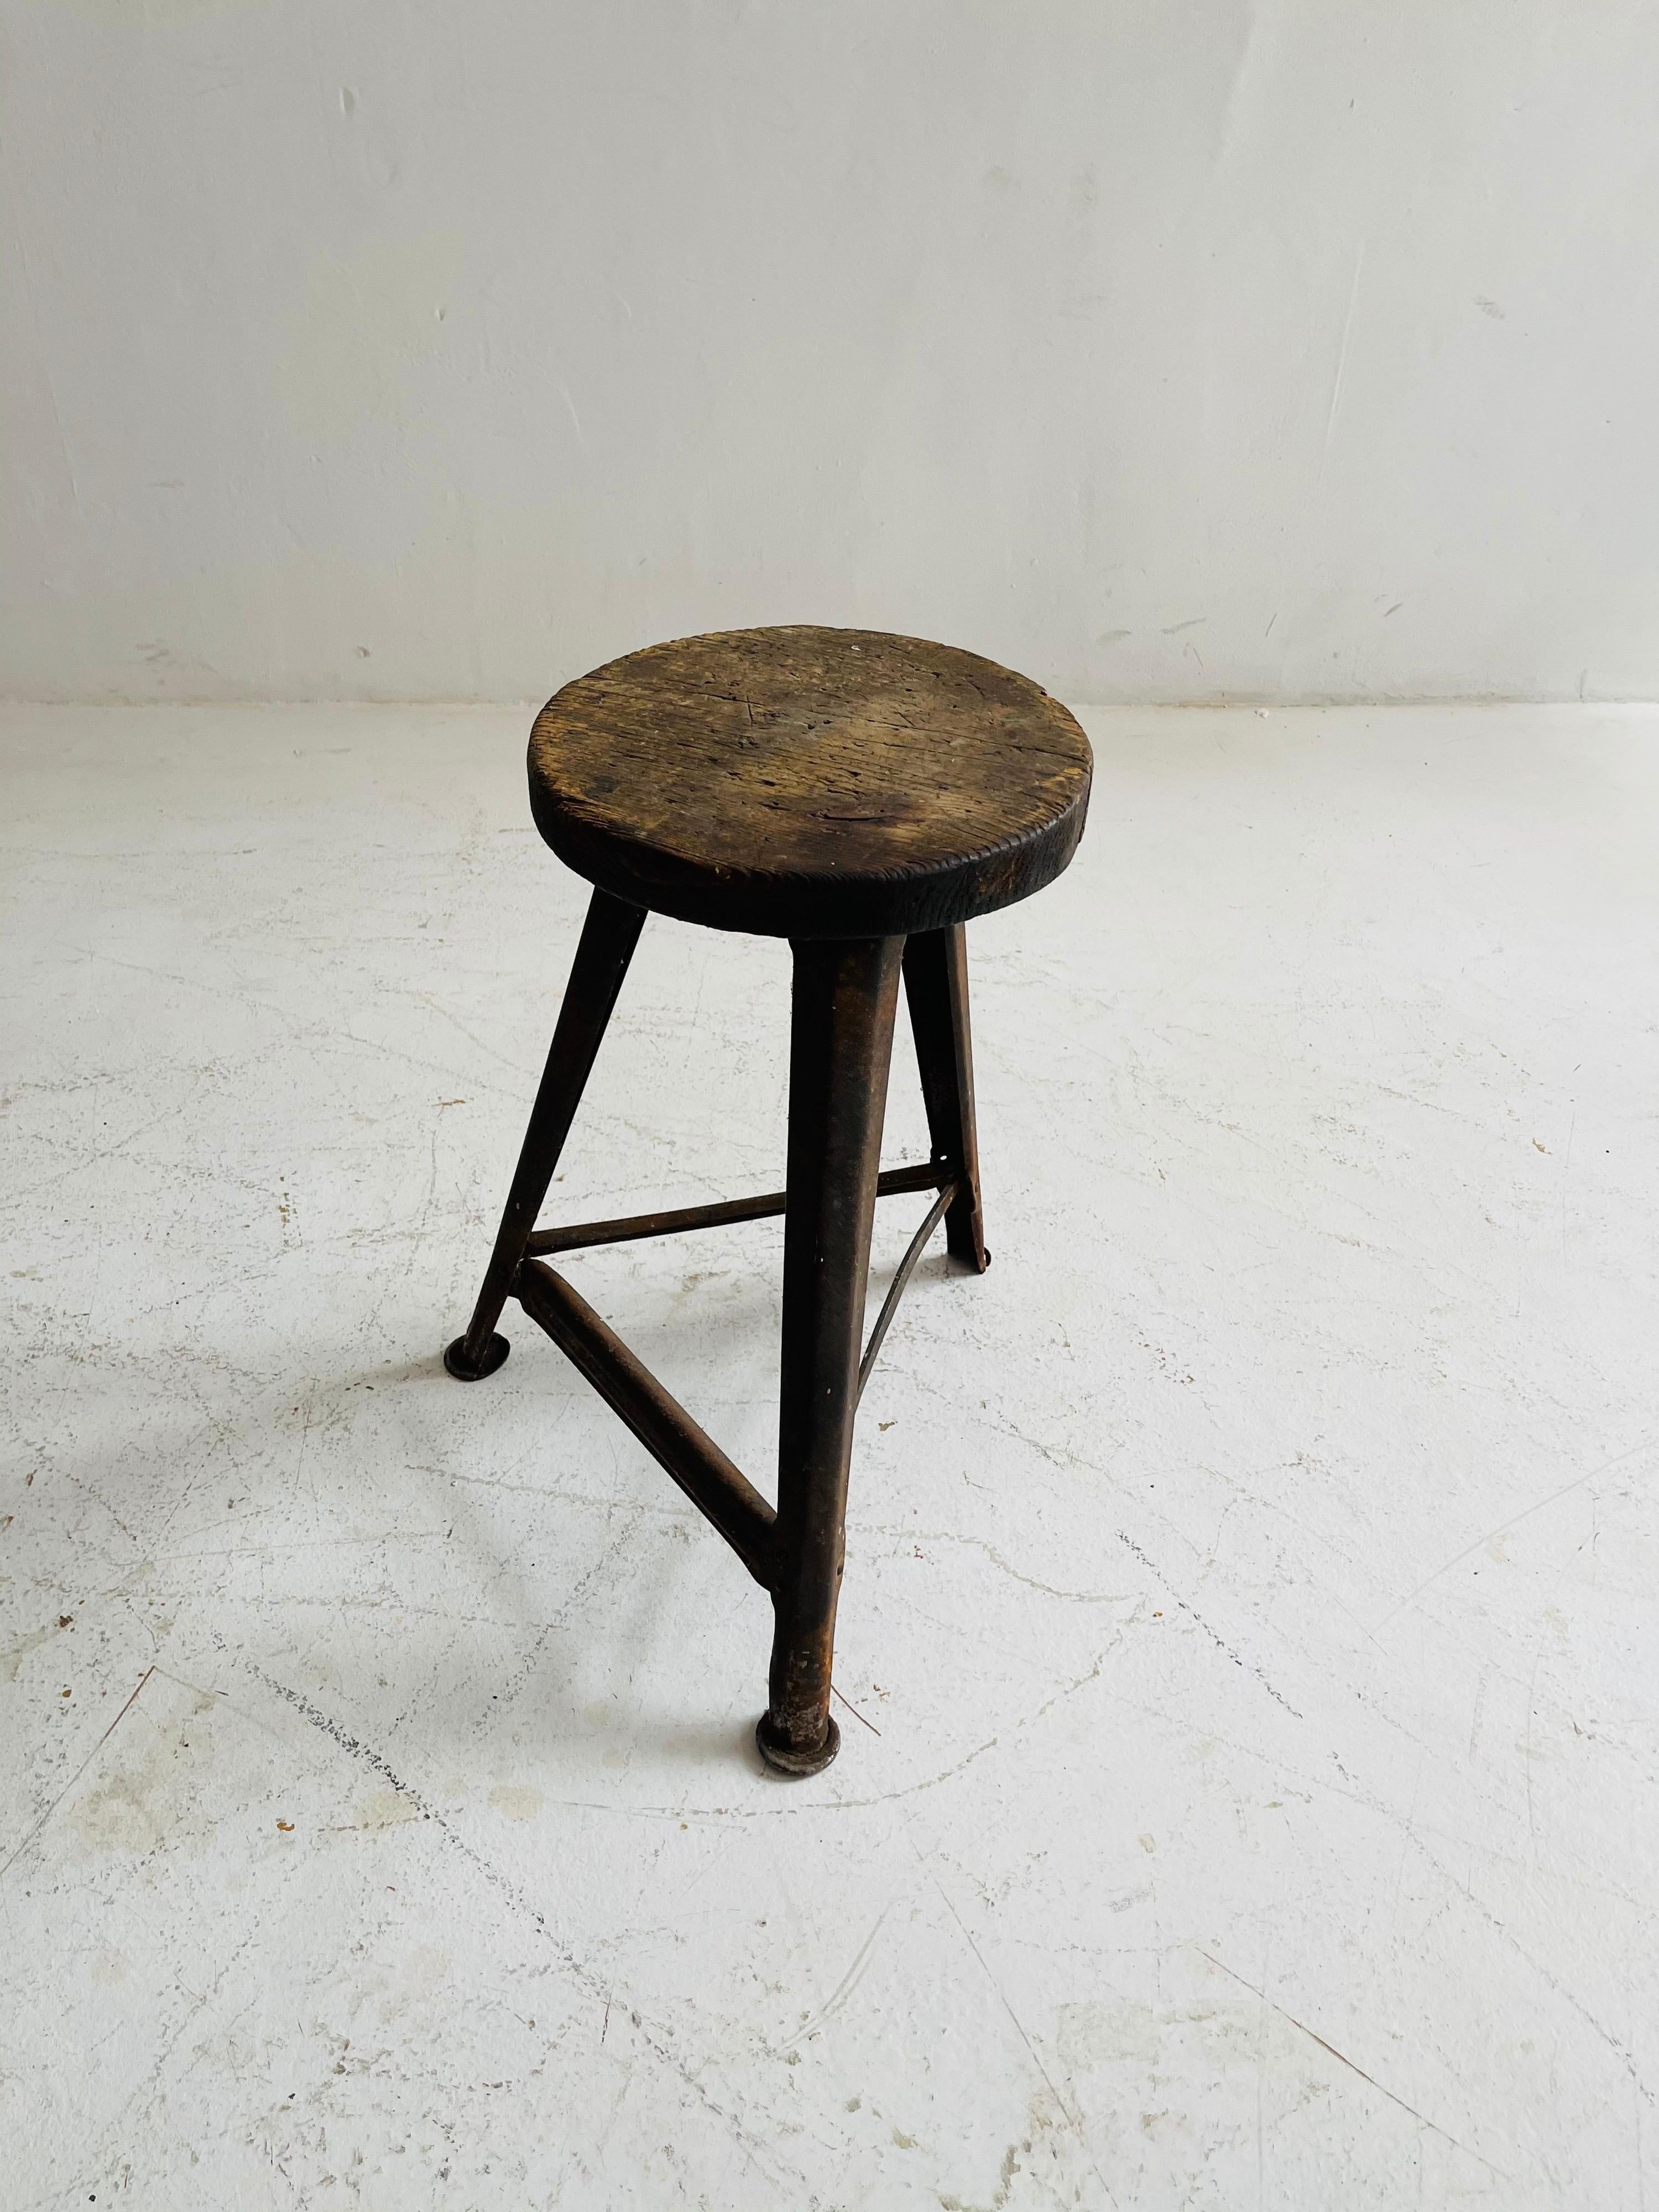 Patinated Industrial Factory Stools Group of Six, Austria, 1930s For Sale 2